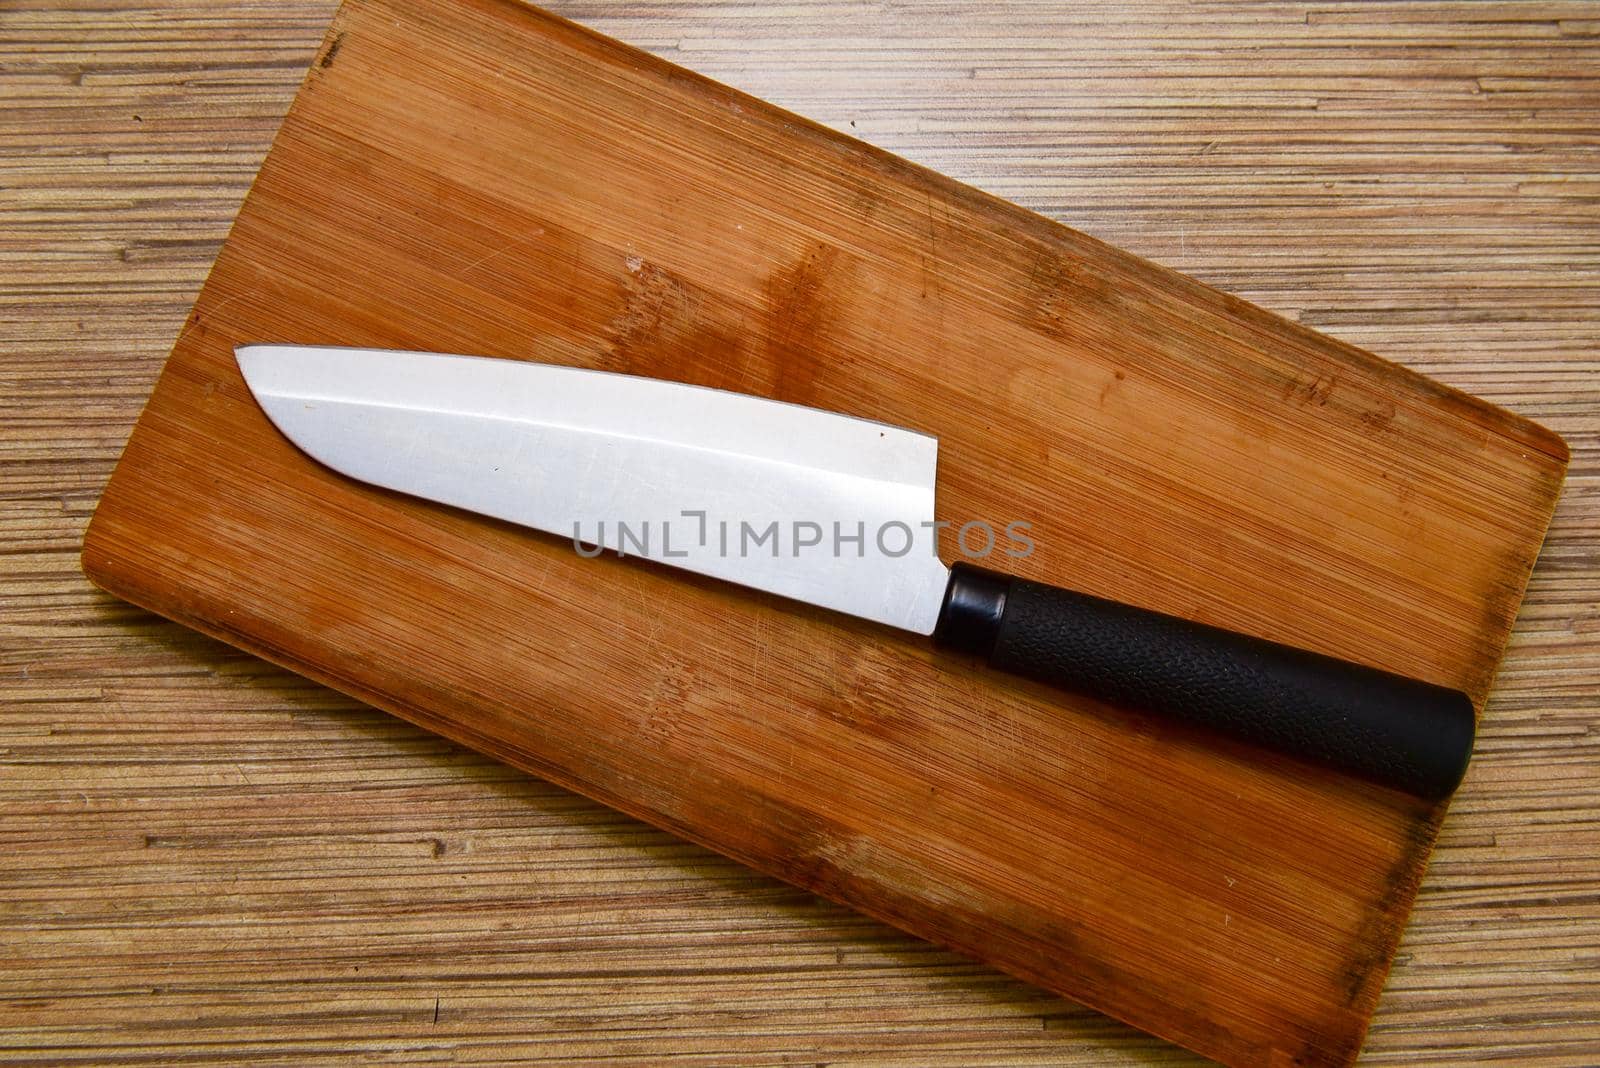 Cutting board and a kitchen knife on wooden background. Top view.